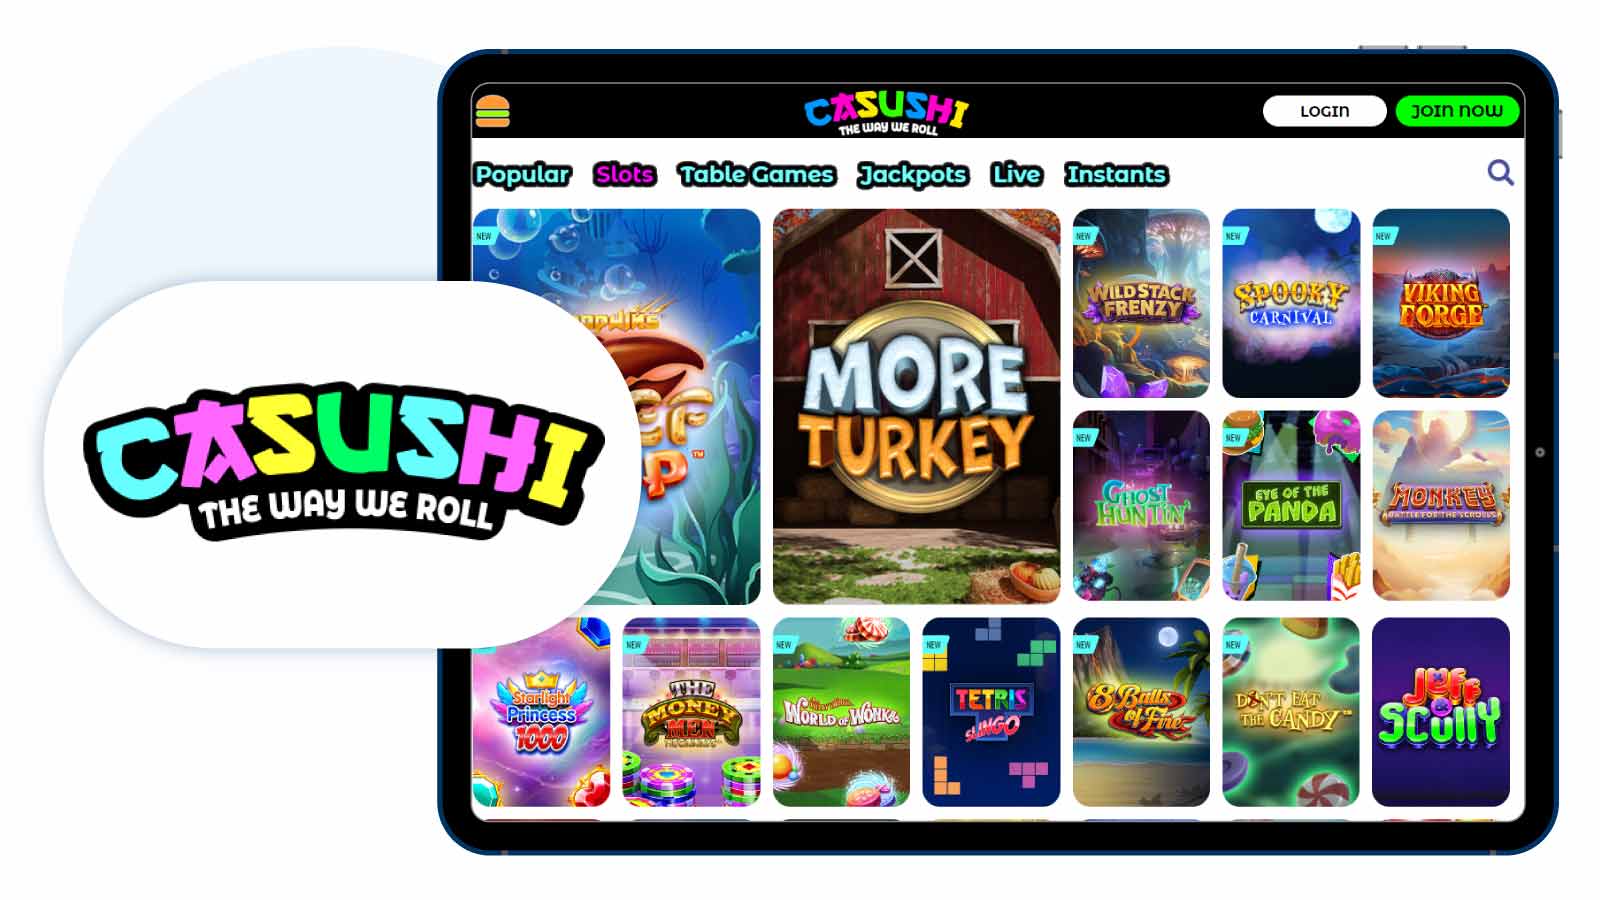 Casushi Casino – Best New Slot Site for PayPal Deposits